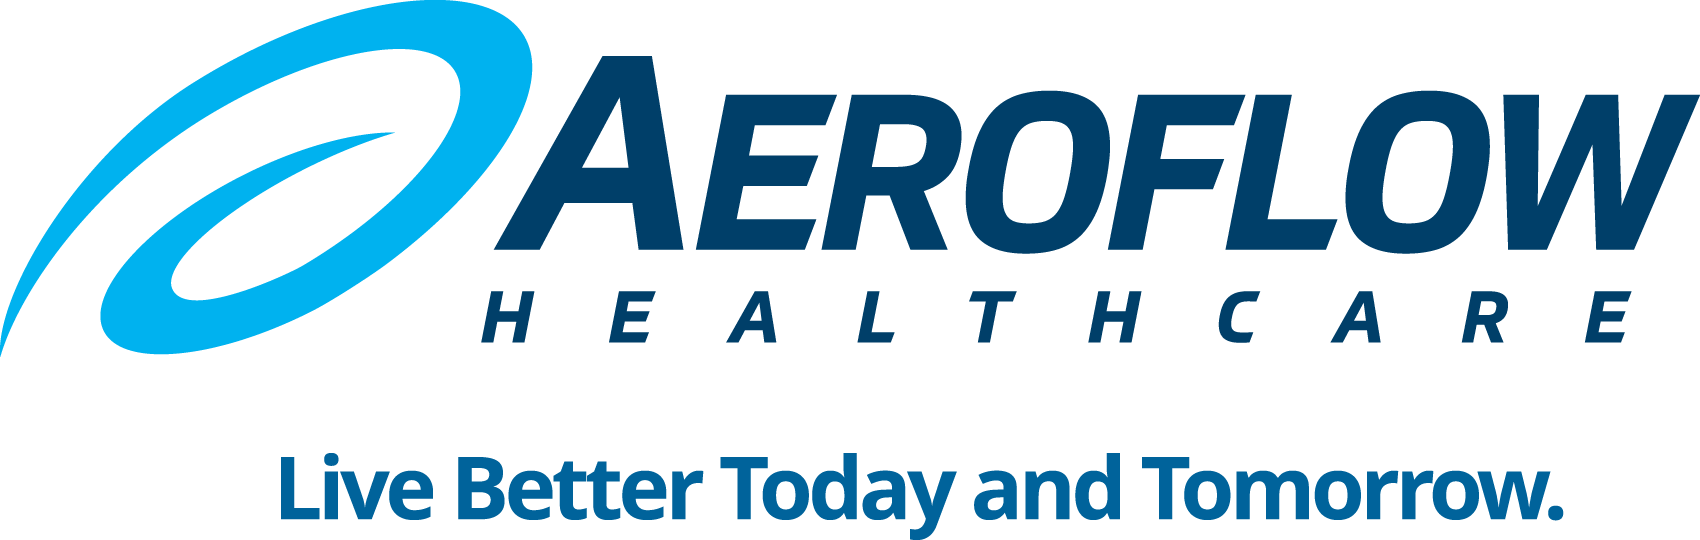 Aeroflow Healthcare Celebrates Texas’s Decision to Eliminate Tax on Critical Family Care Products Including Diapers and Breast Pumps